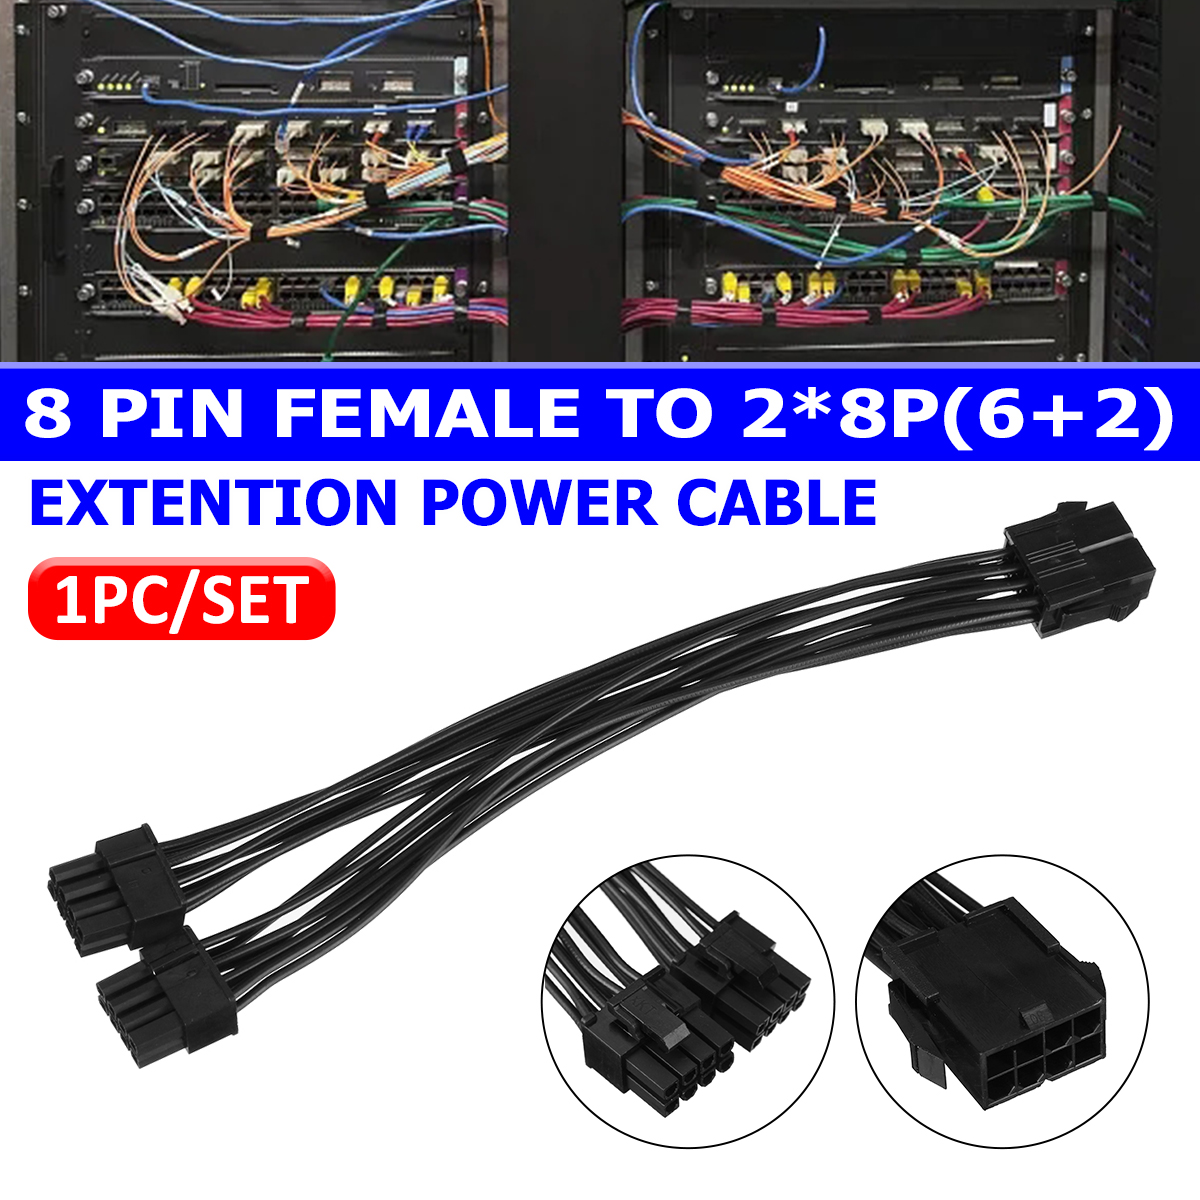 20cm-Graphics-Card-8-Pin-Female-to-28P62pin-Extention-Power-Cable-Male-1931117-1